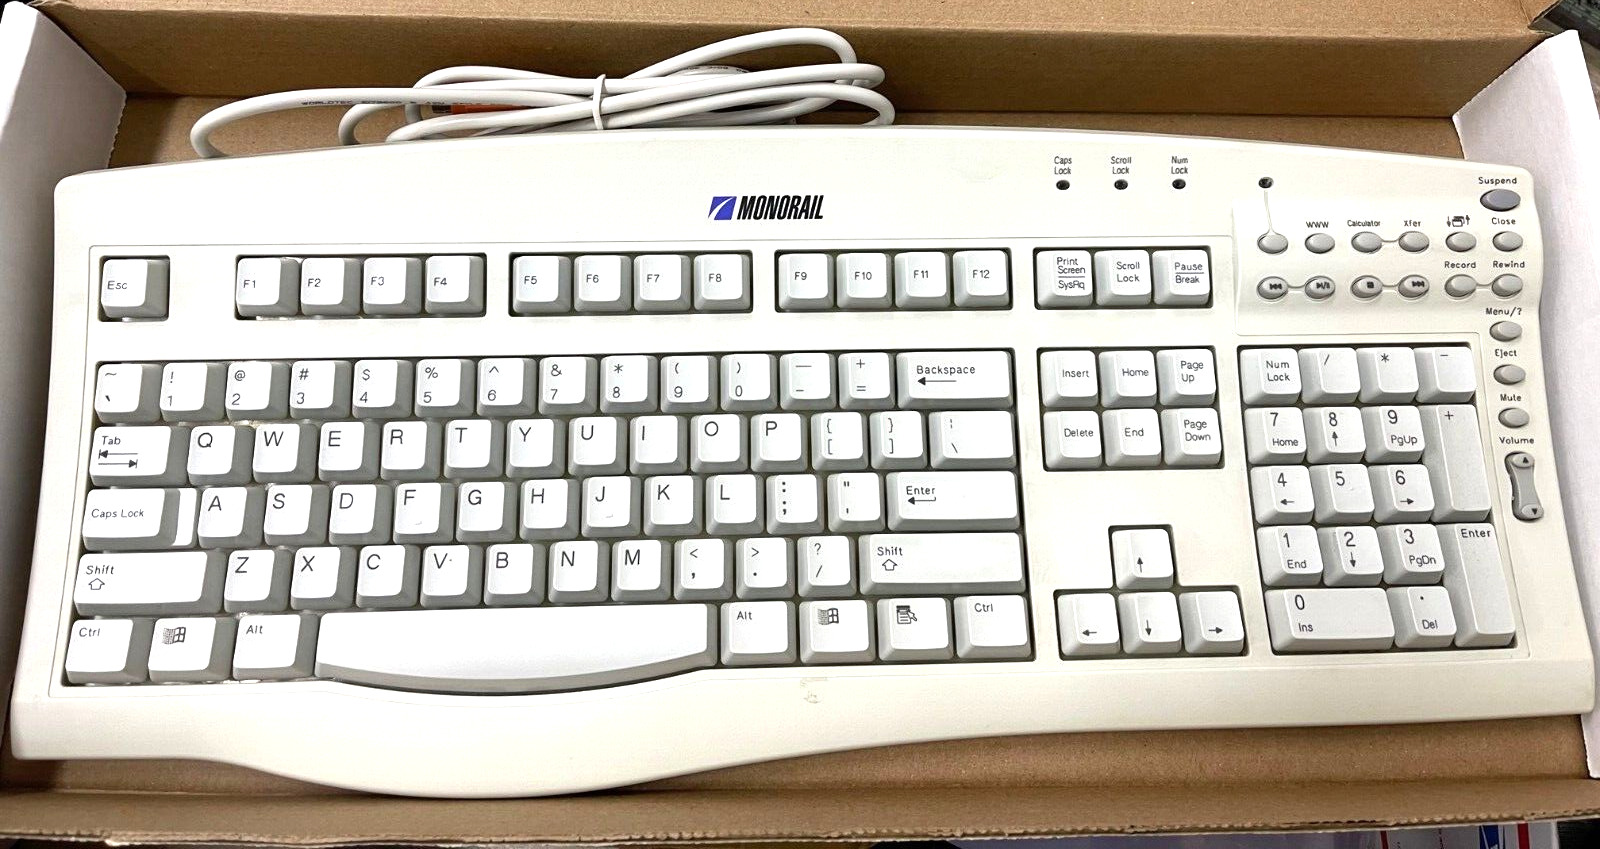 RARE VINTAGE MONORAIL SK-2500 PS2 WINDOWS KEYBOARD WITH CD SOFTWARE US-RM0-KBRK. Available Now for $48.95